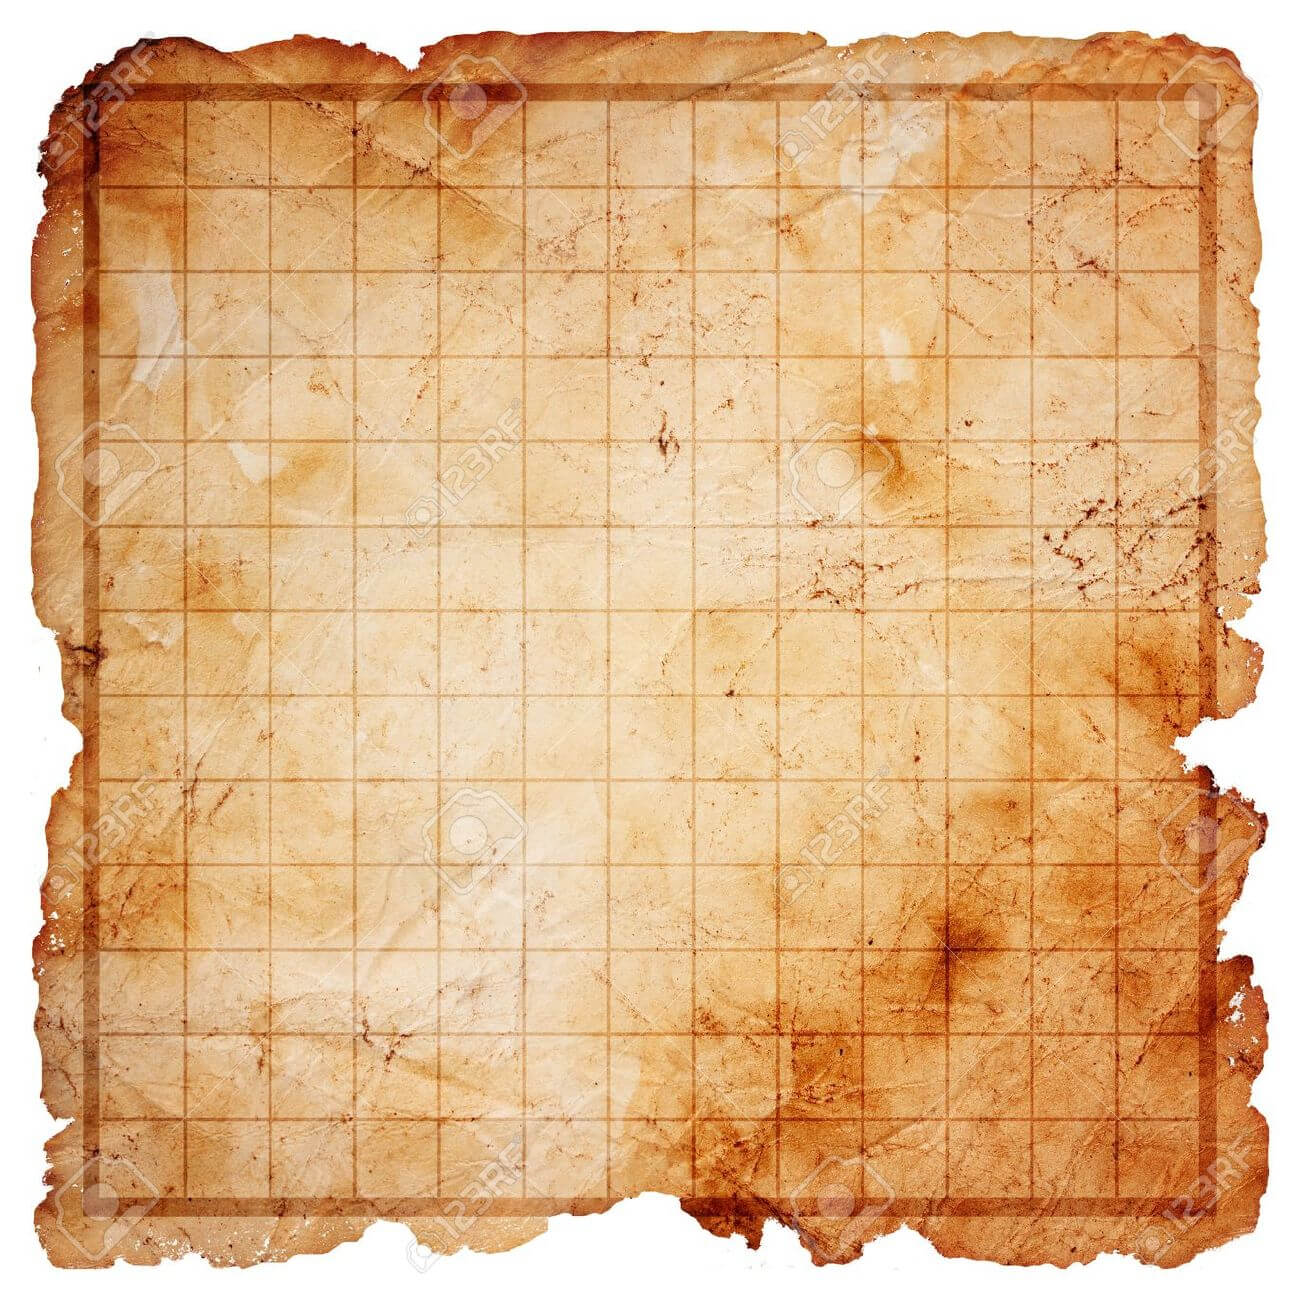 Blank Pirate Map Template – Atlantaauctionco With Regard To Blank Pirate Map Template